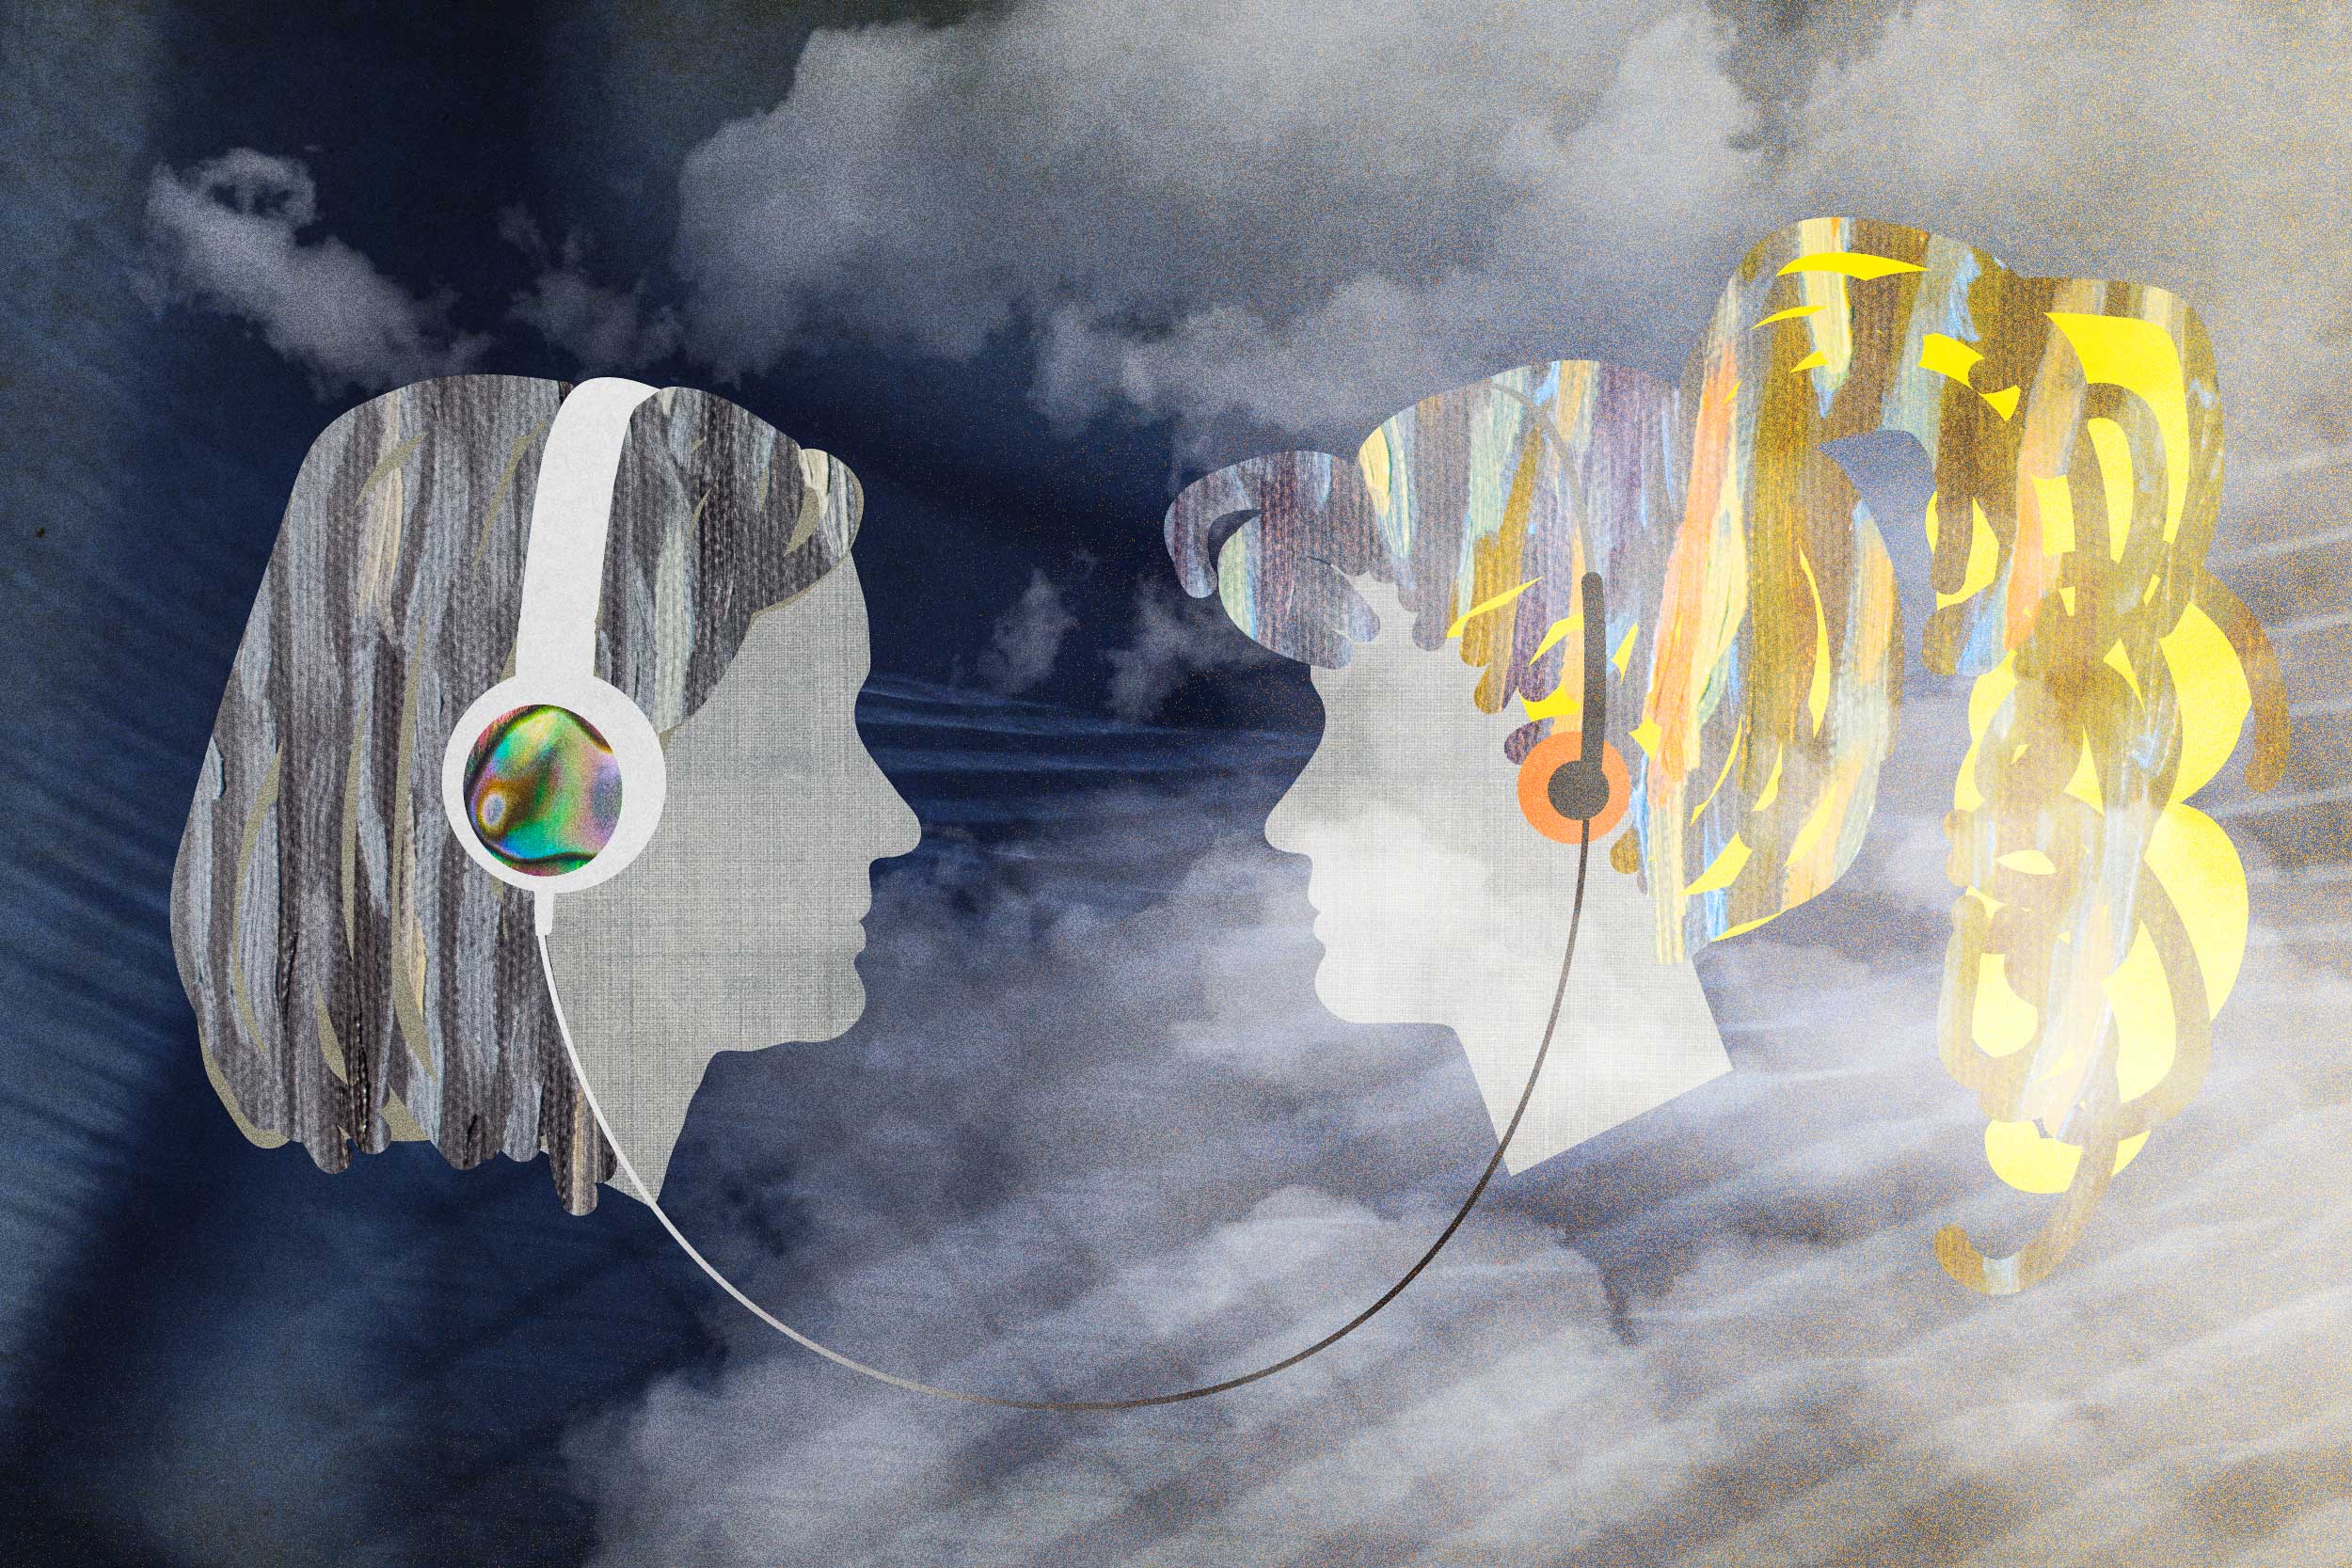 Illustration: background looks like clouds mostly on right side, profile of two women, both wearing over the head headphones and their head phone cord is connected together